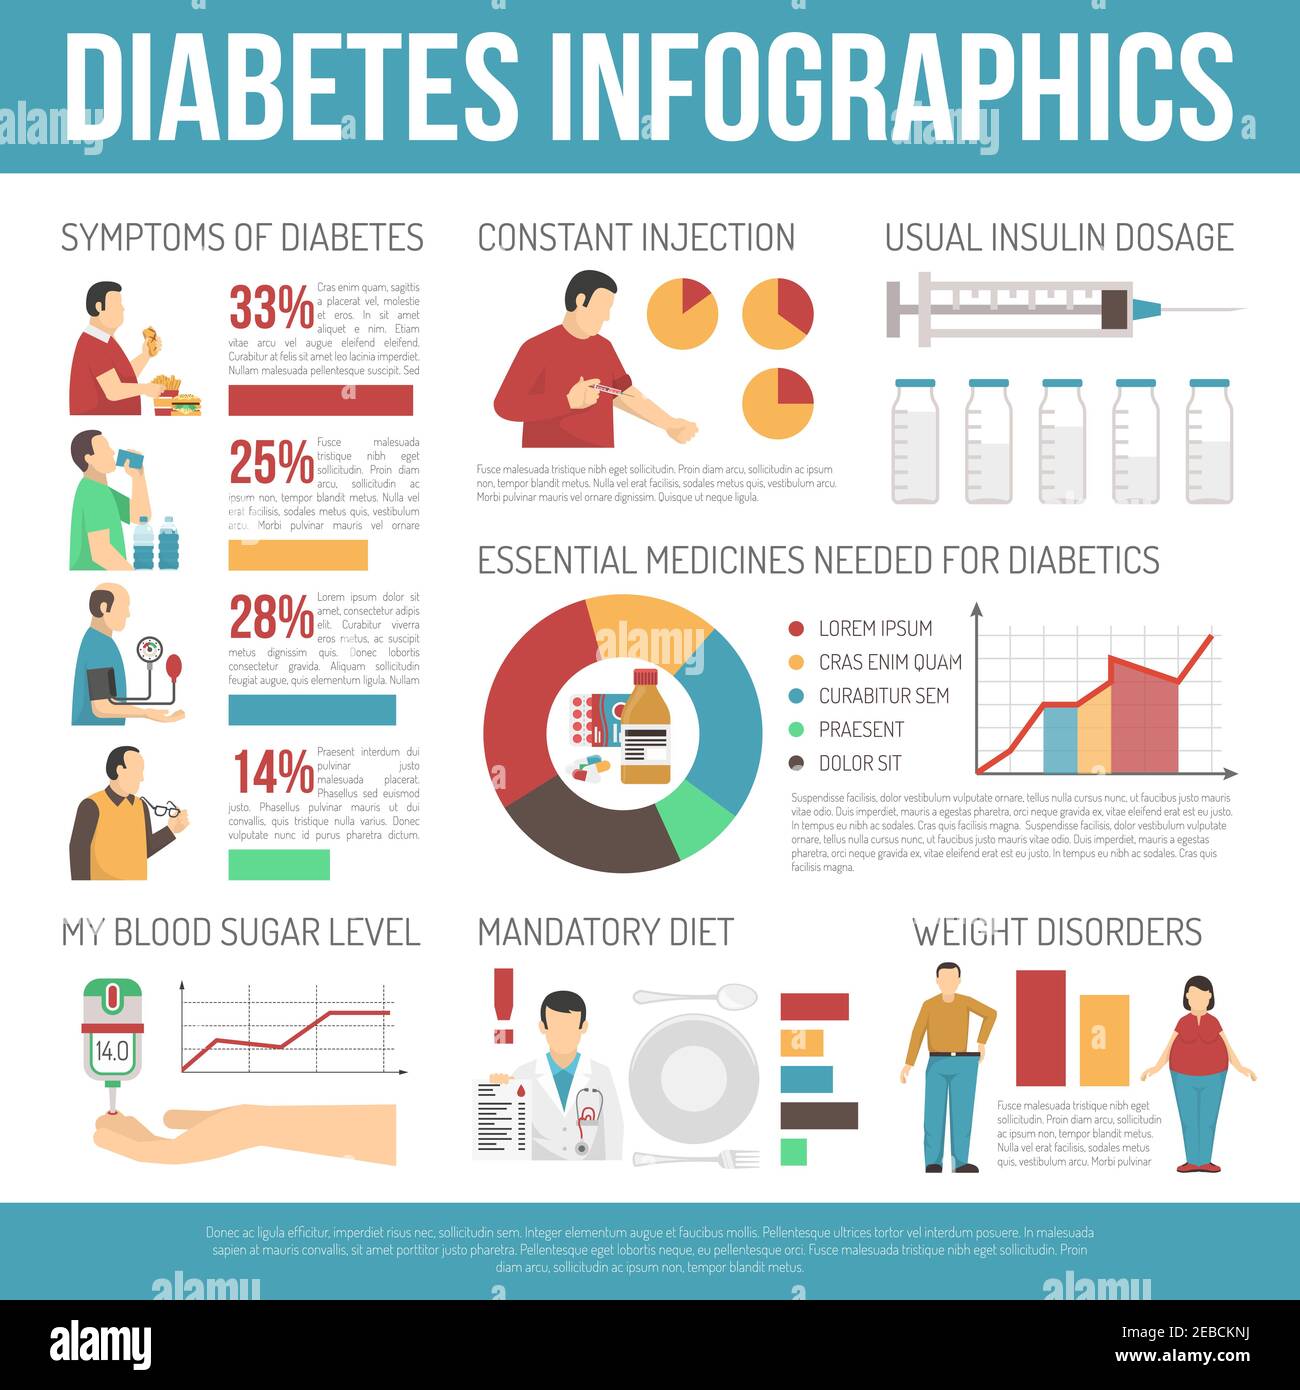 Diabetes infographics layout with information about weight disorders